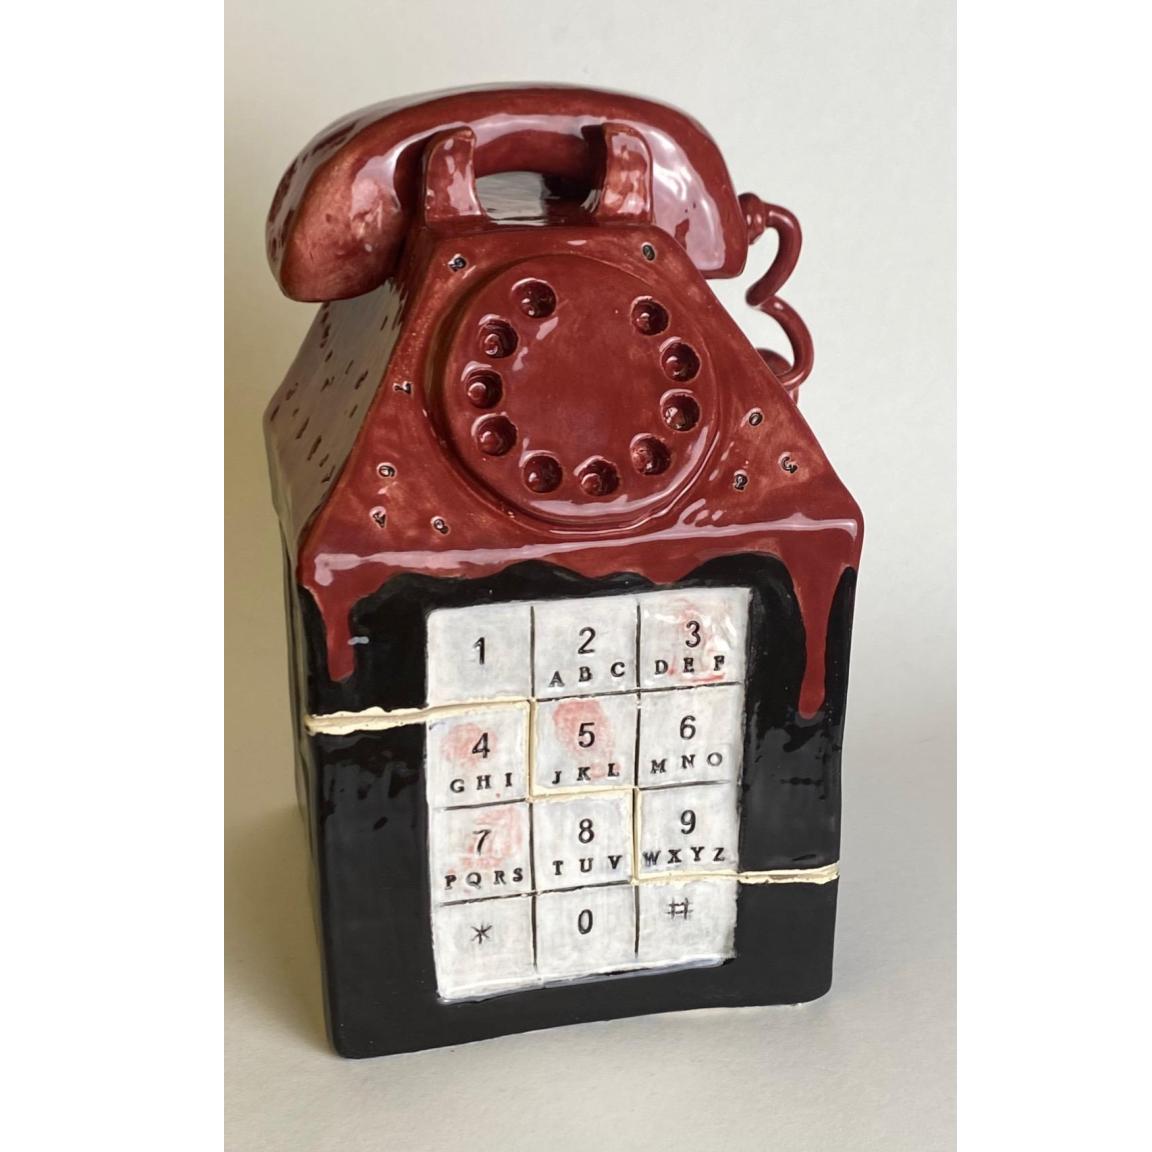 Student artwork, a sculpture of a red phone on top of a box with a keypad on the face of the box